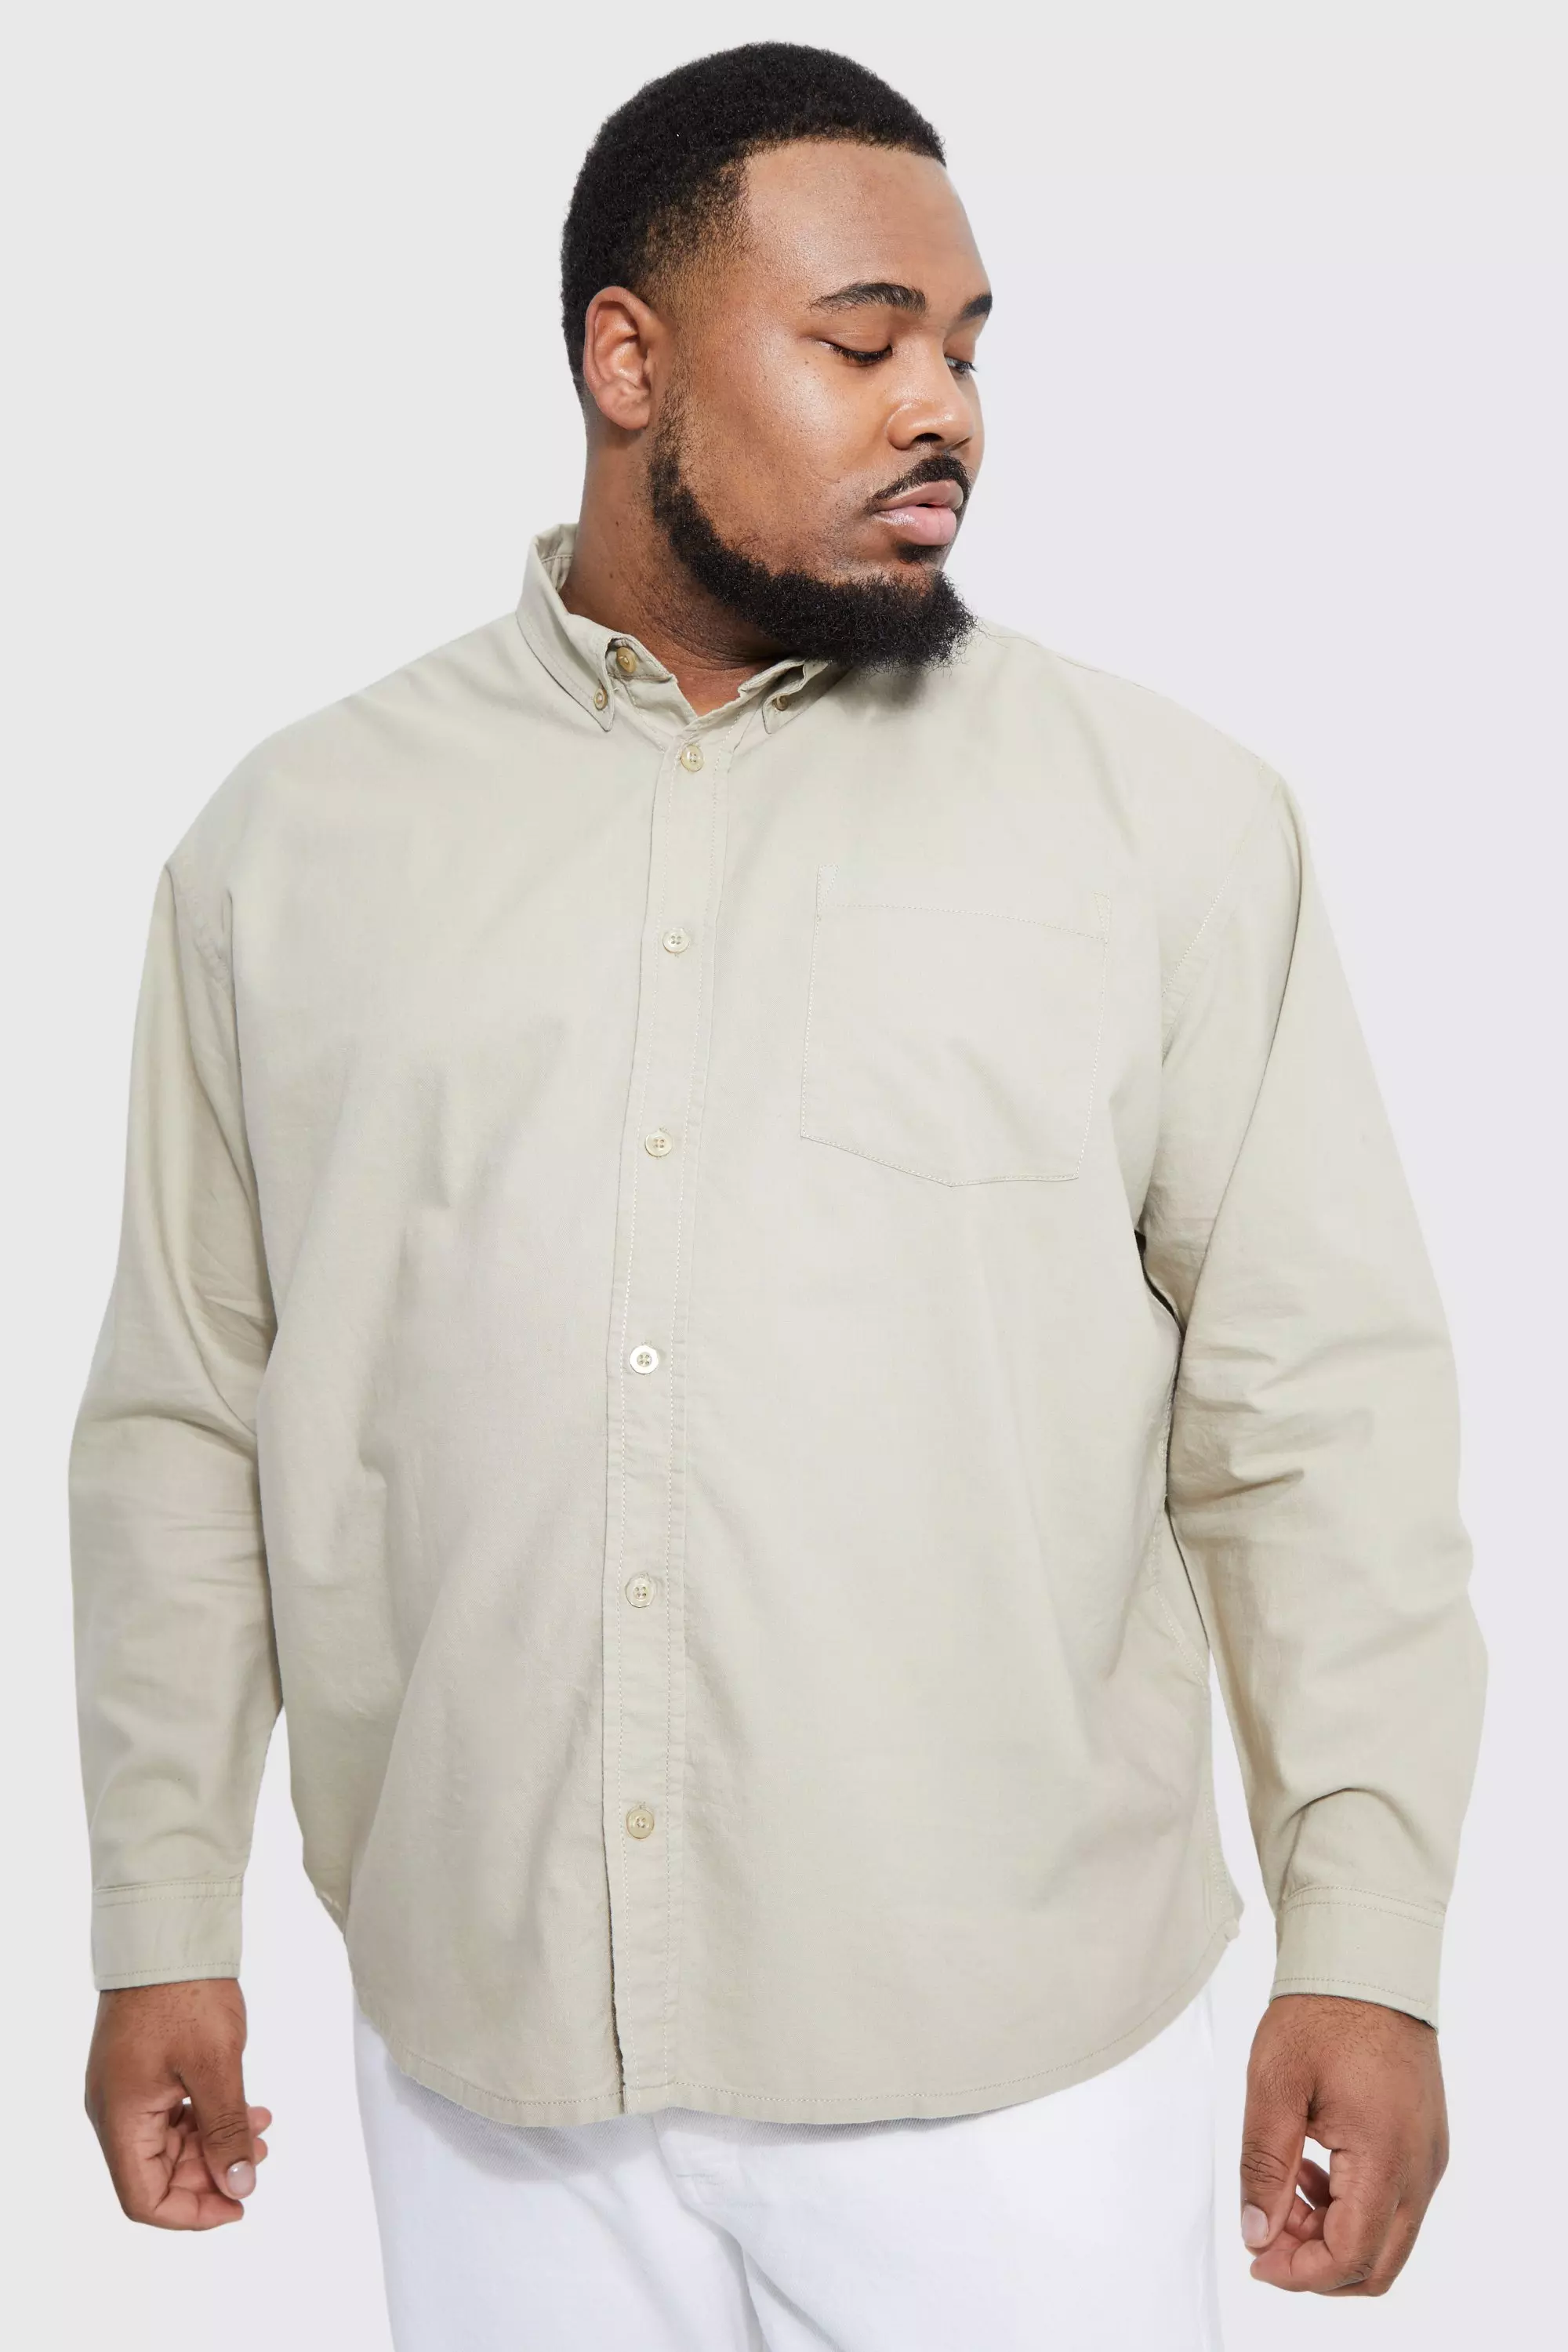 Plus Relaxed Fit Long Sleeve Oxford Shirt Stone